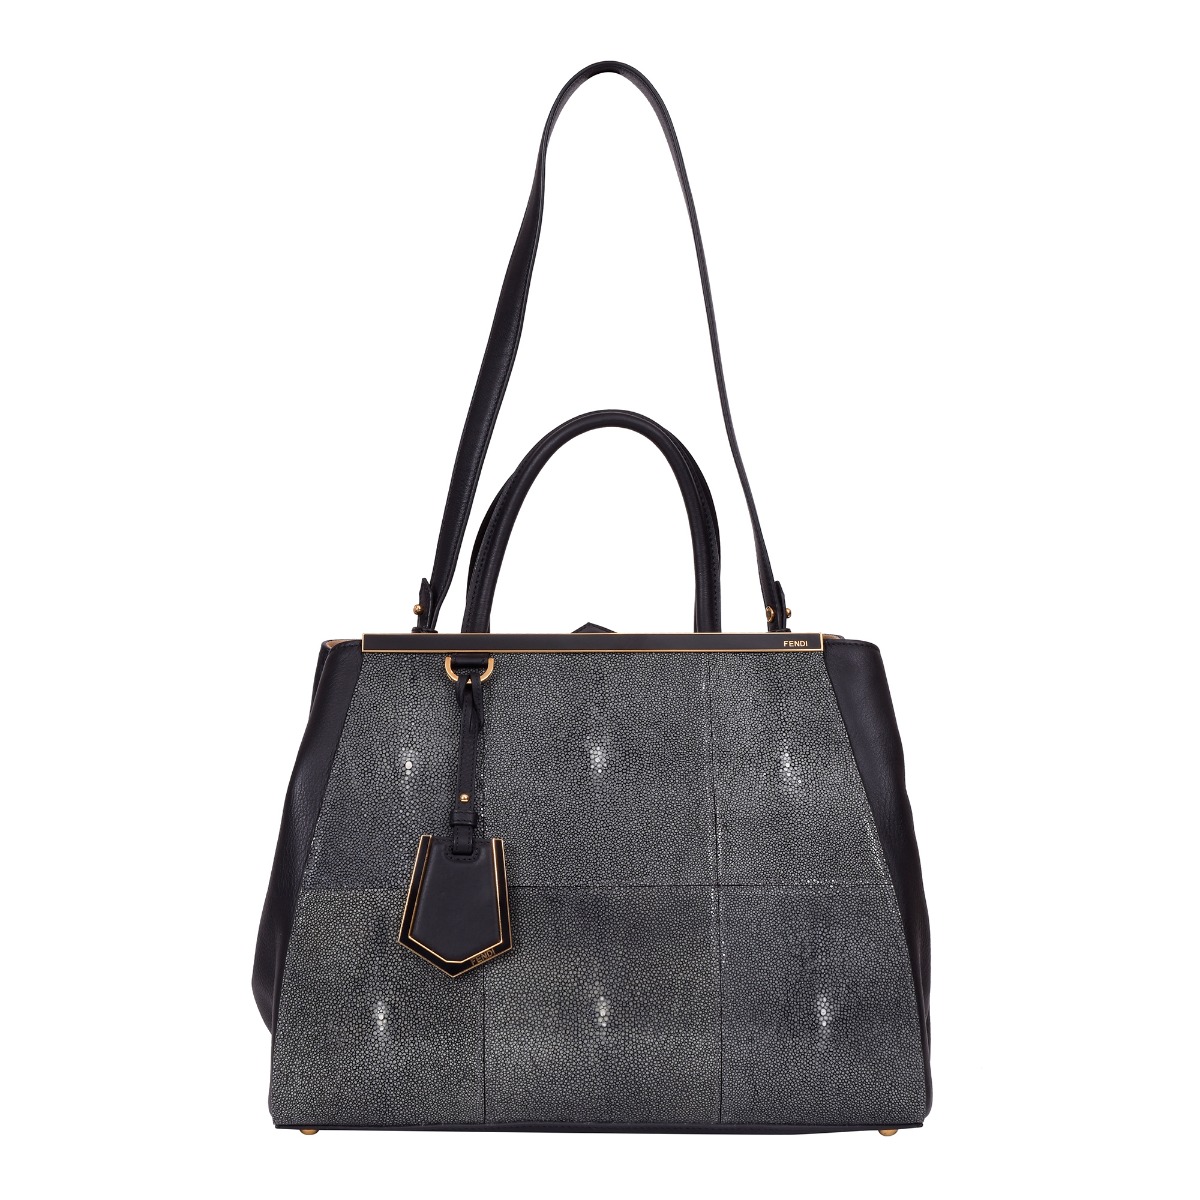 Fendi 2Jours Stingray Limited Edition Tote